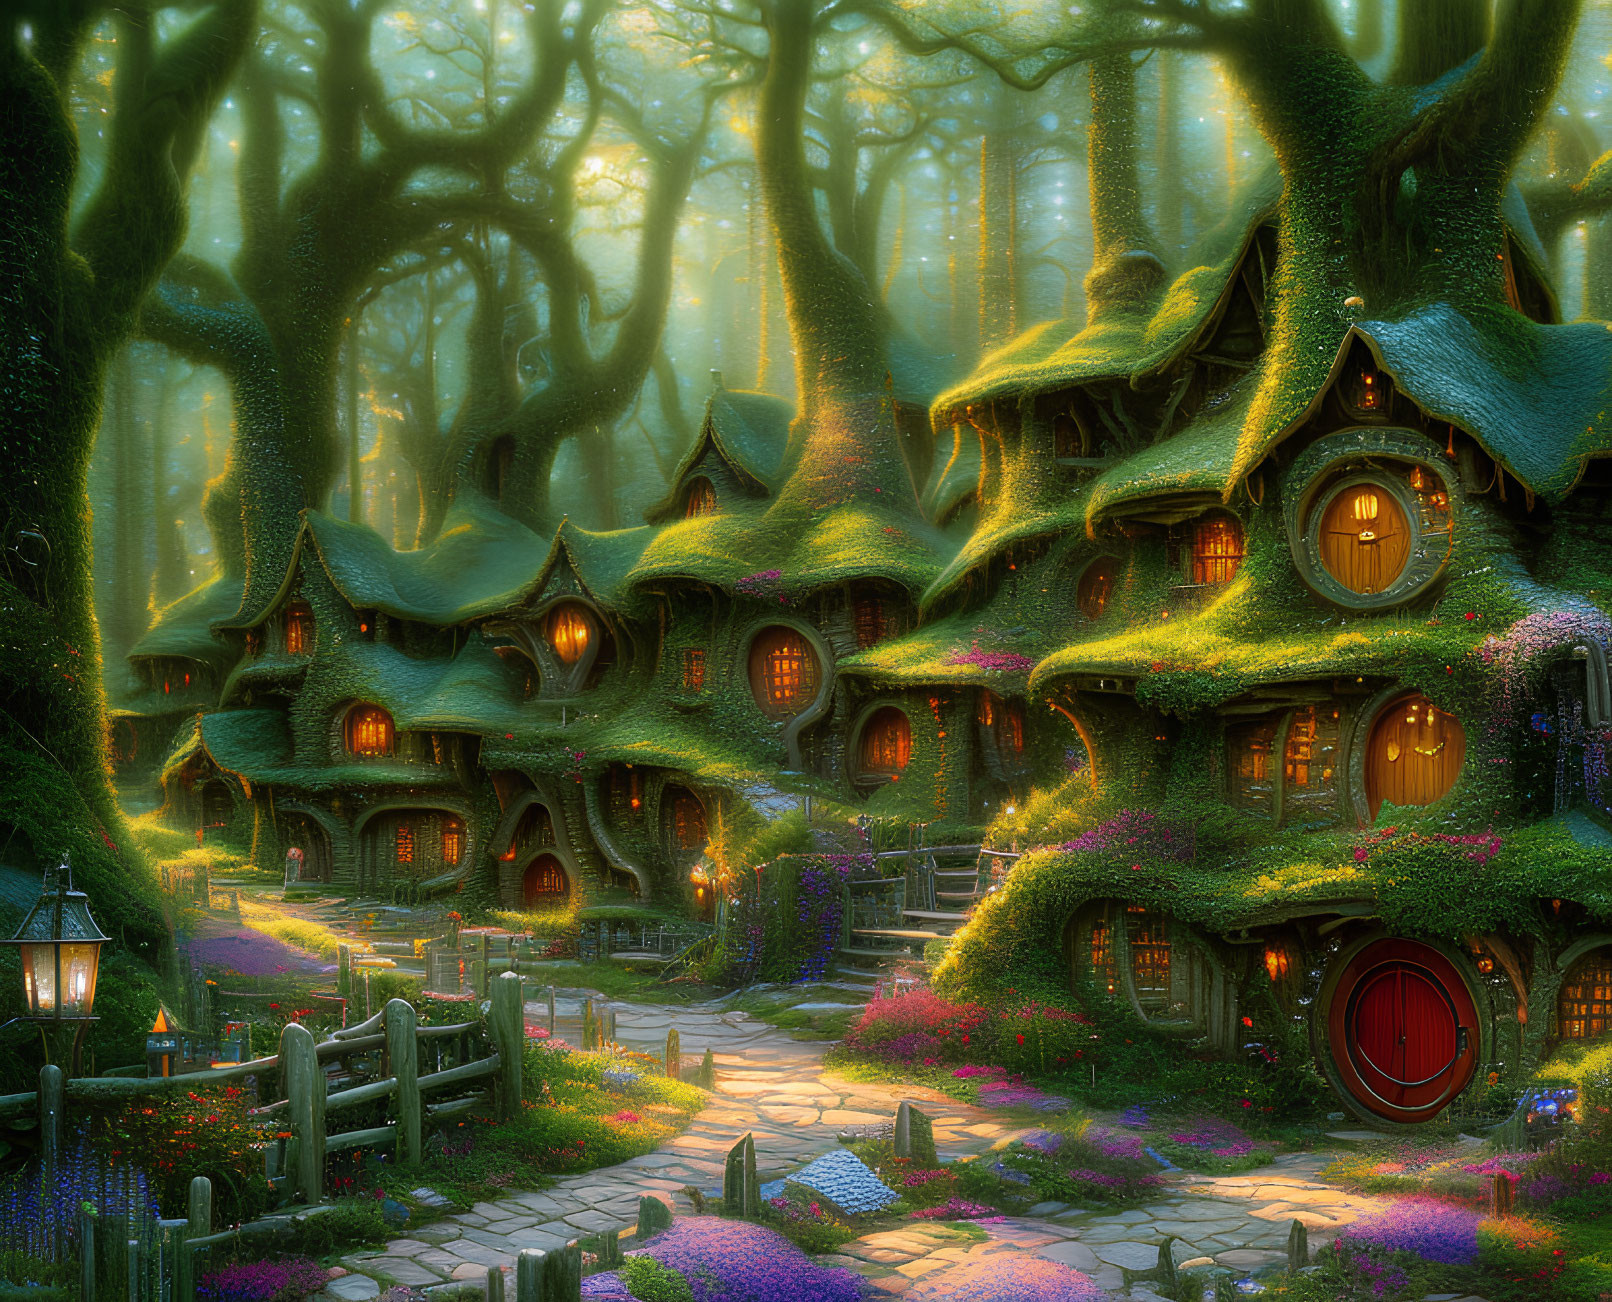 Whimsical forest scene with glowing treehouses and moss-covered roofs